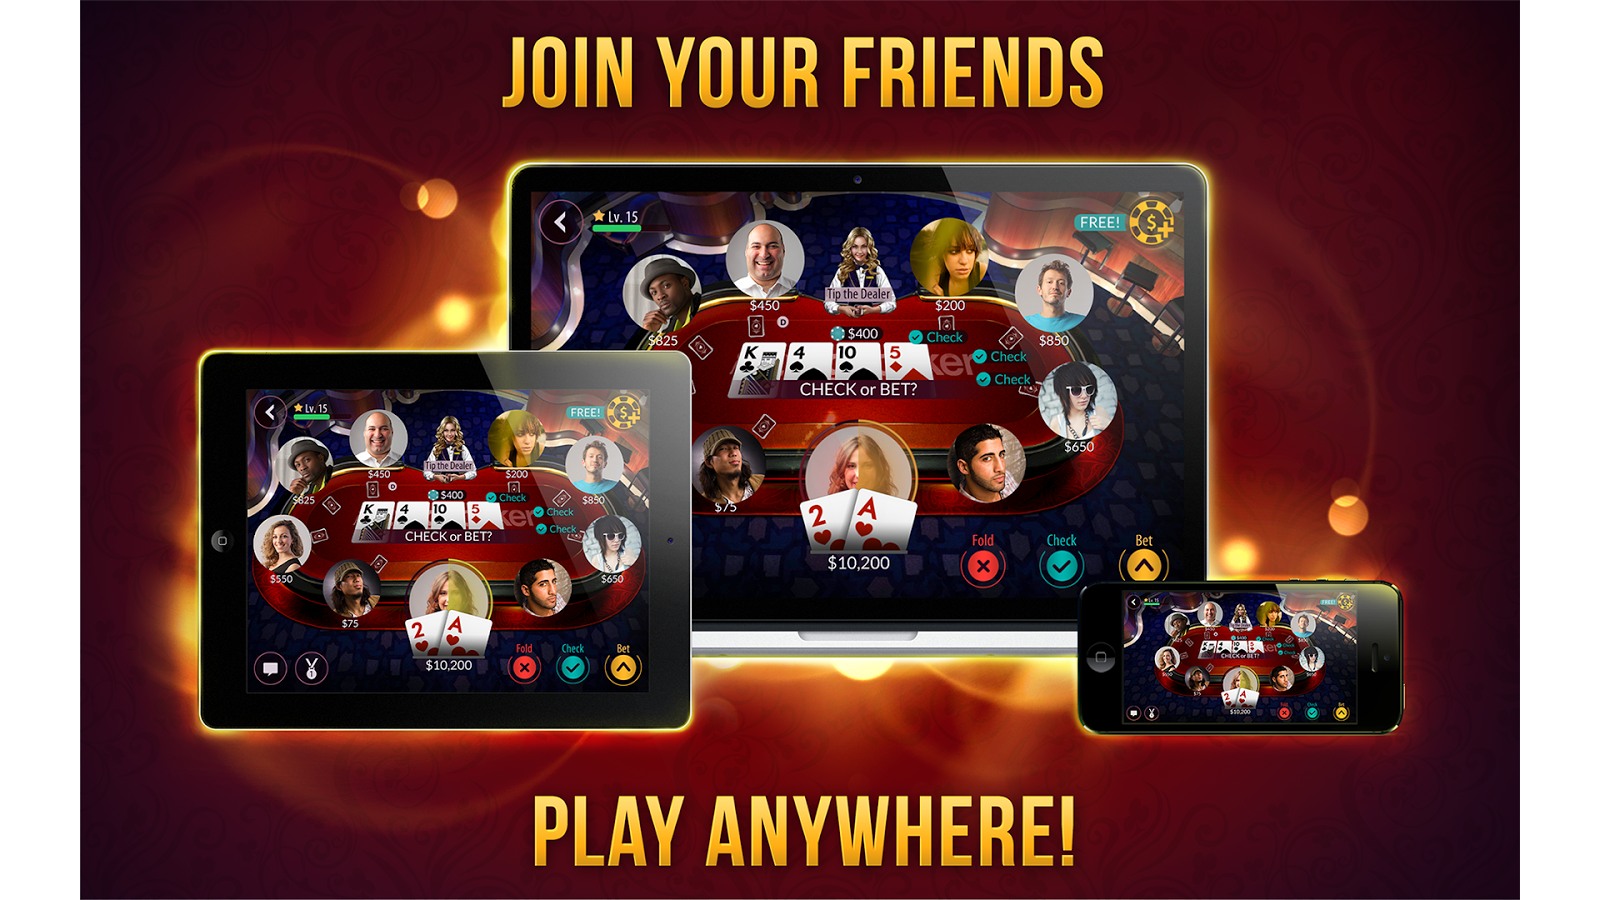 Where can i play blackjack online with real people, for free?